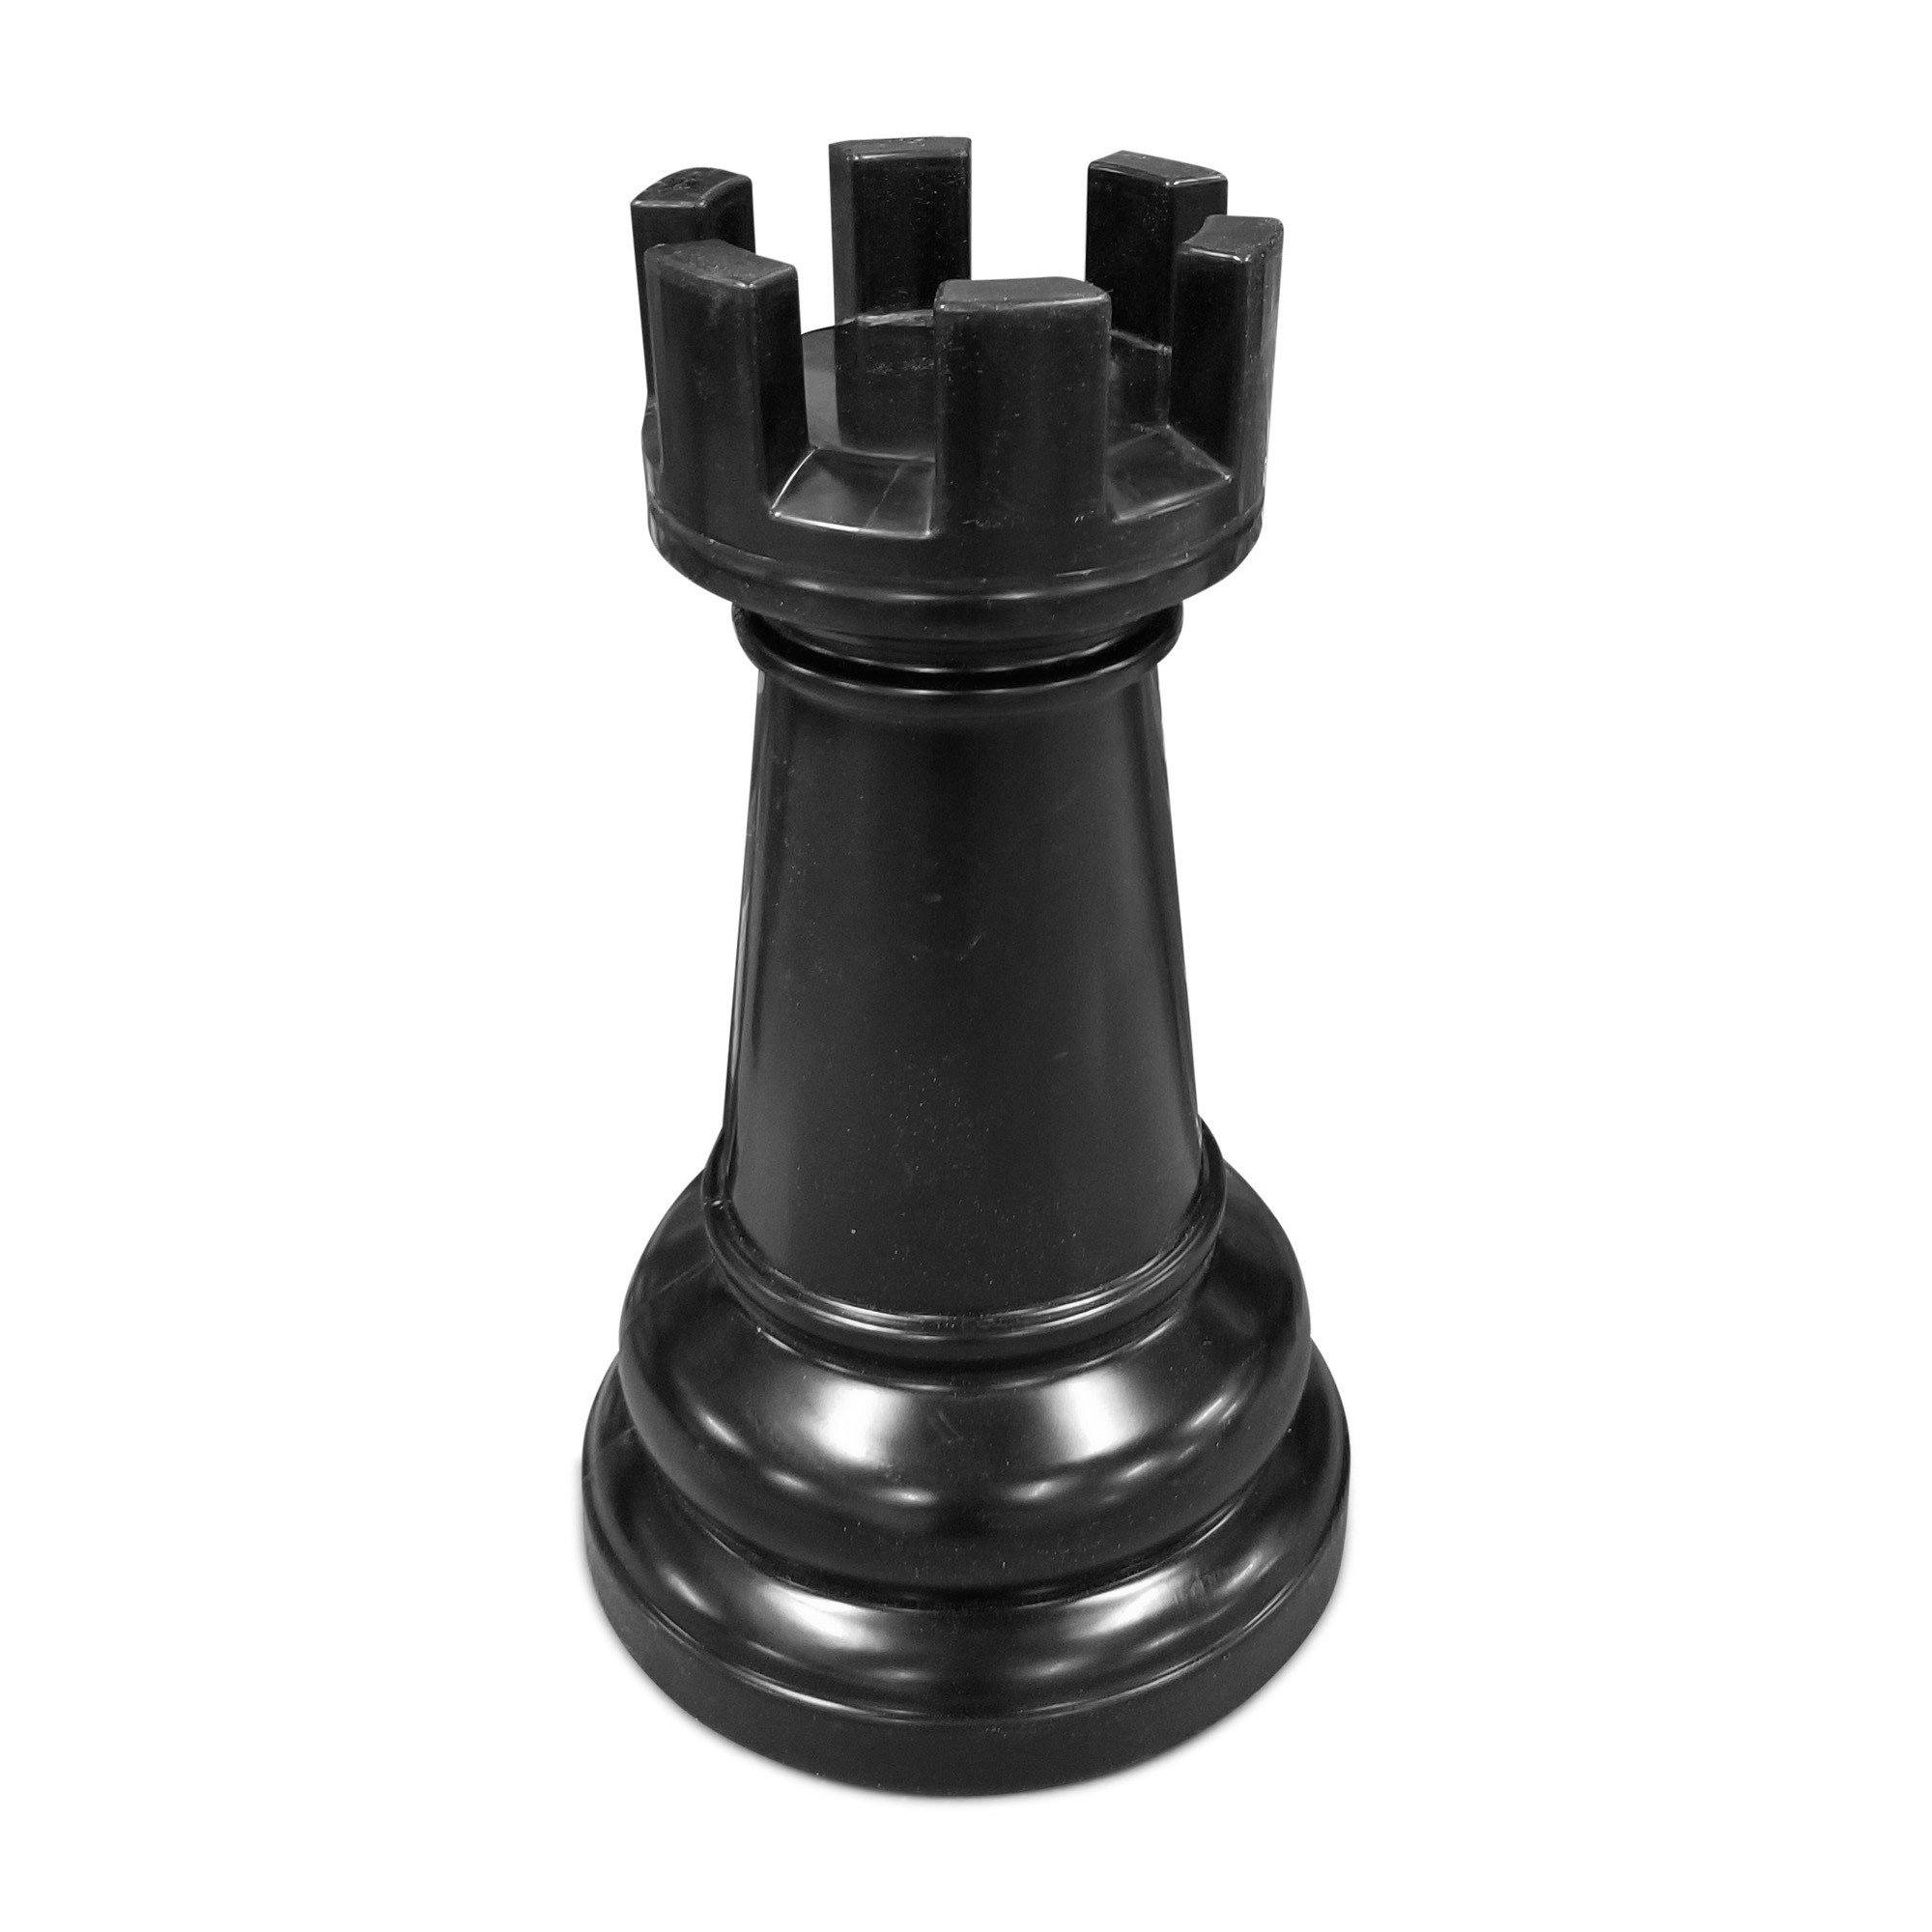  MegaChess Individual Chess Piece - Rook - 16.5 Inches